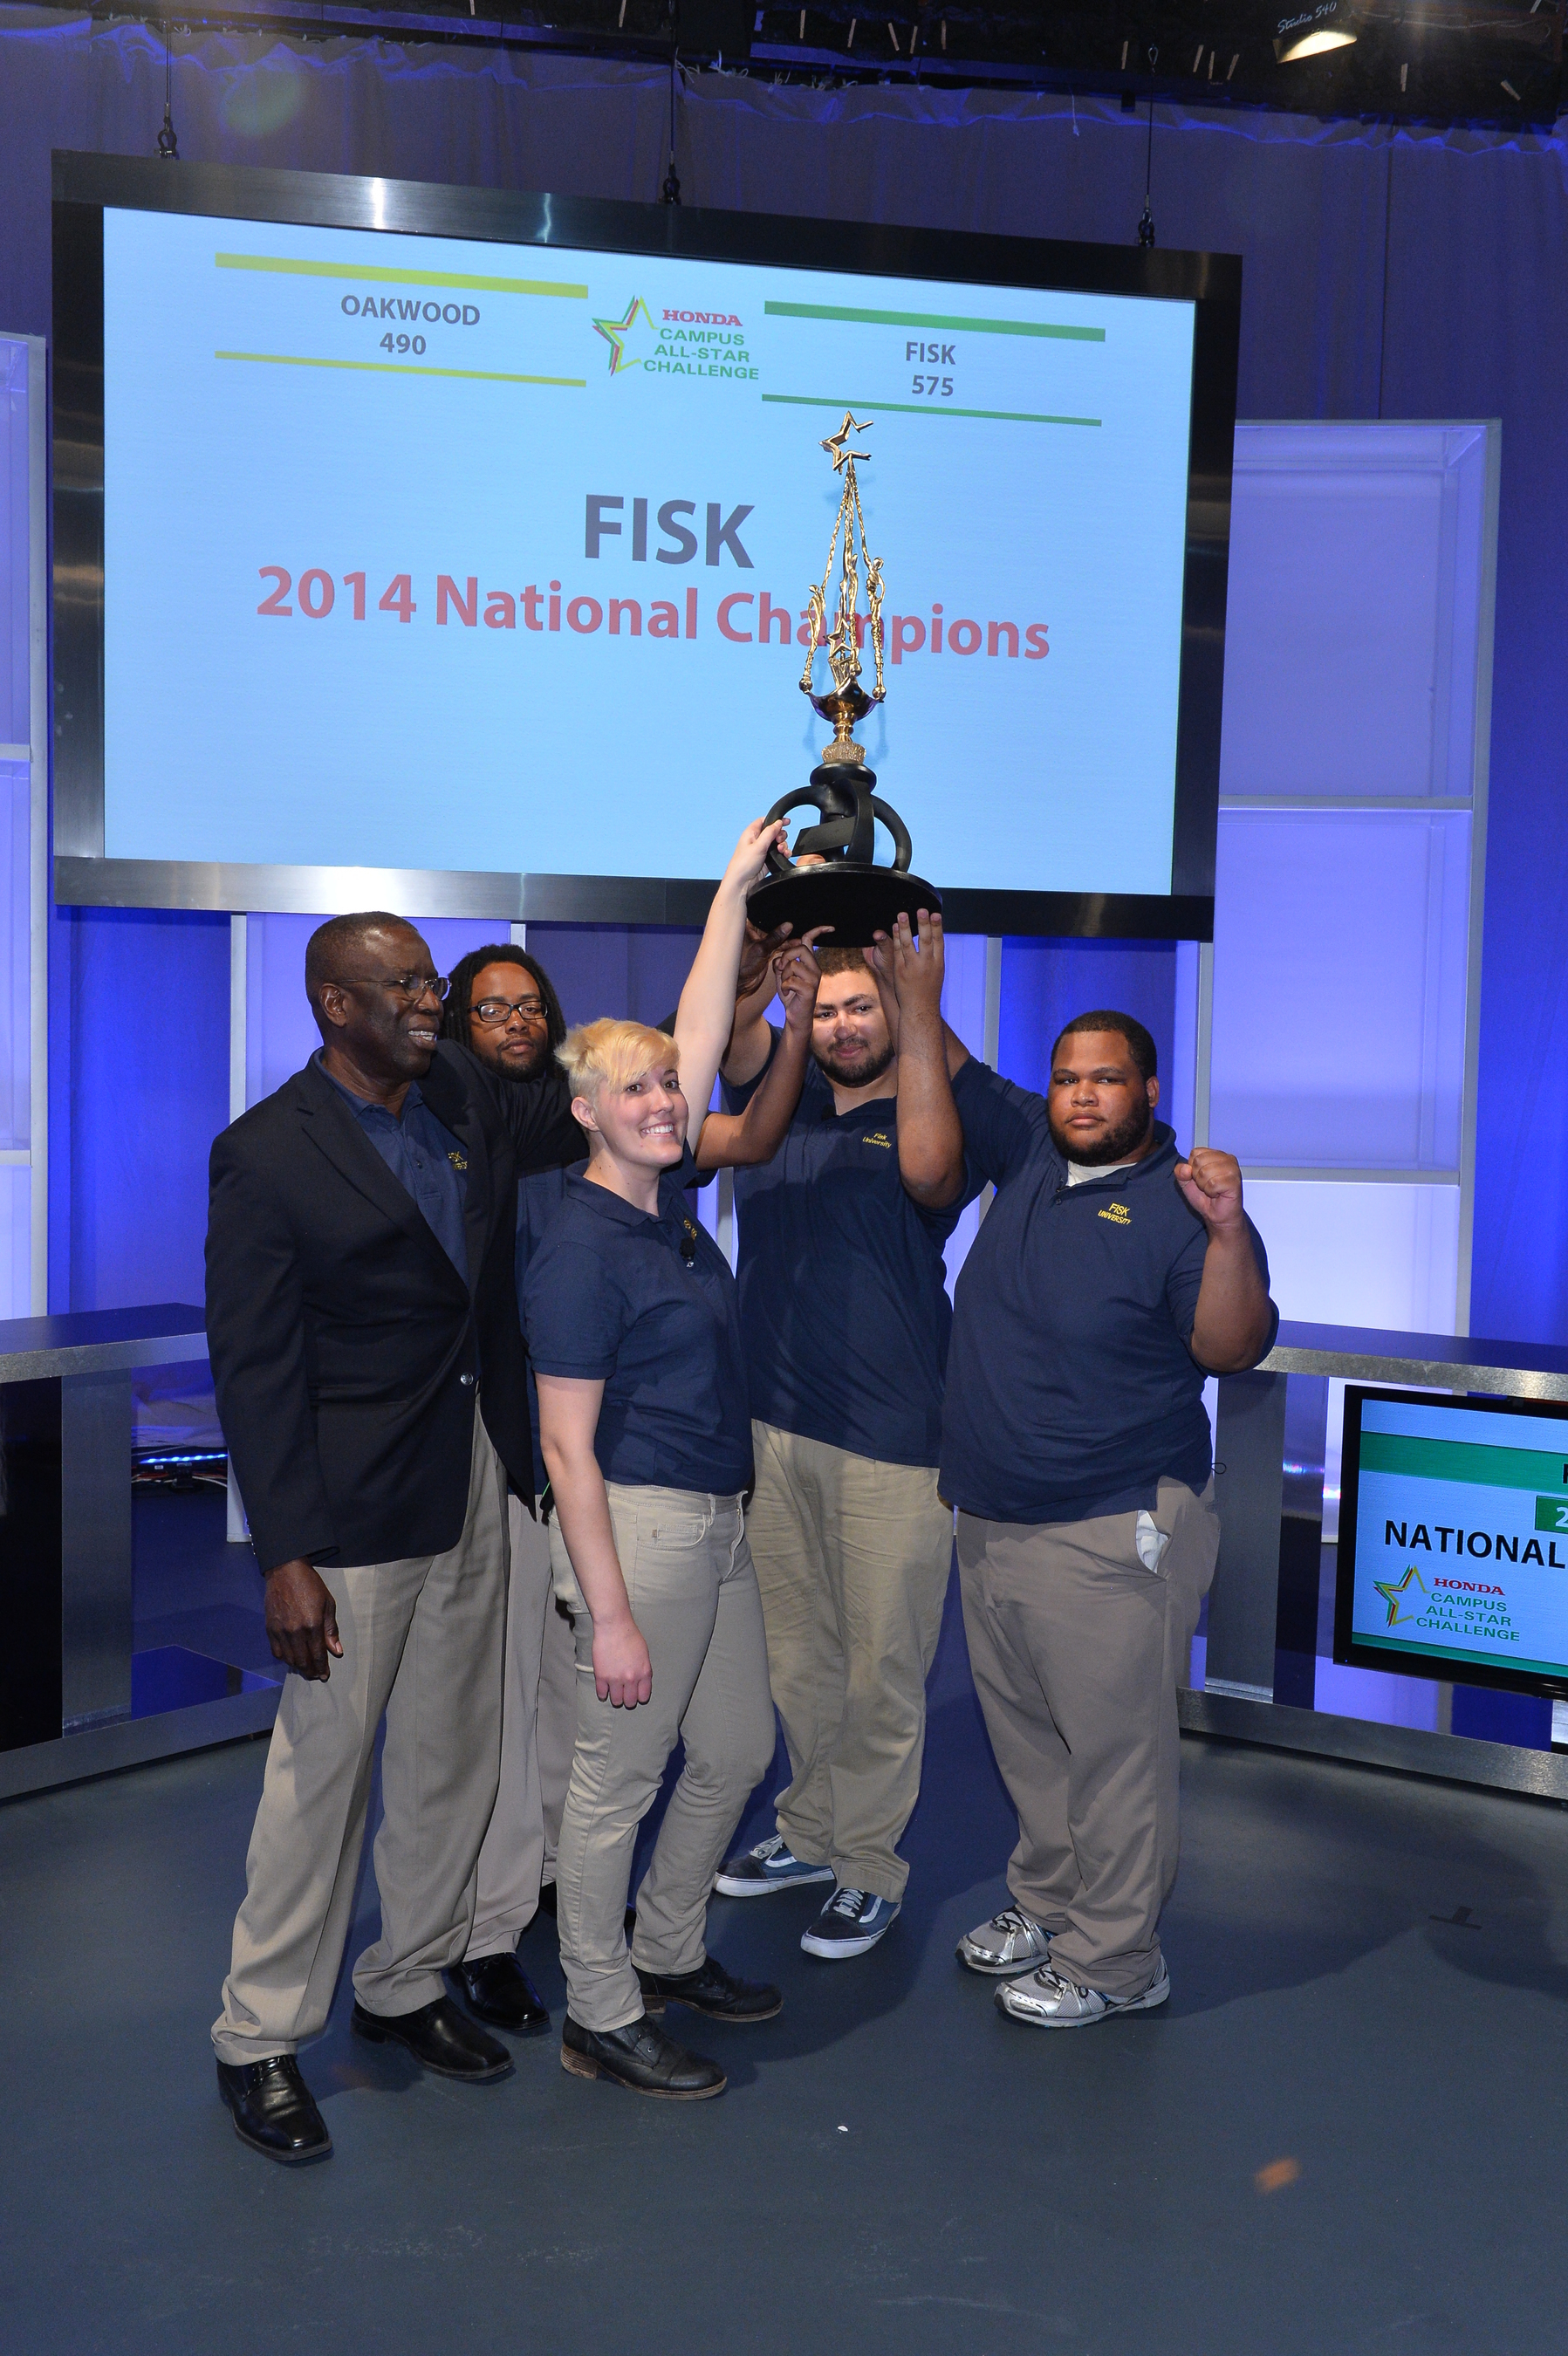 Fisk University, 2014 Honda Campus All-Star Challenge (HCASC) National Champions, celebrate their victory on April 14, 2014 in Torrance, CA. From left to right: Dr. Stafford W. Cargill (coach), Anthony M. Franklin, Anna M. Wilkins, Matthew G. Barthwell, Victor Ray Bradley (team captain)  (PRNewsFoto/American Honda Motor Co., Inc.)